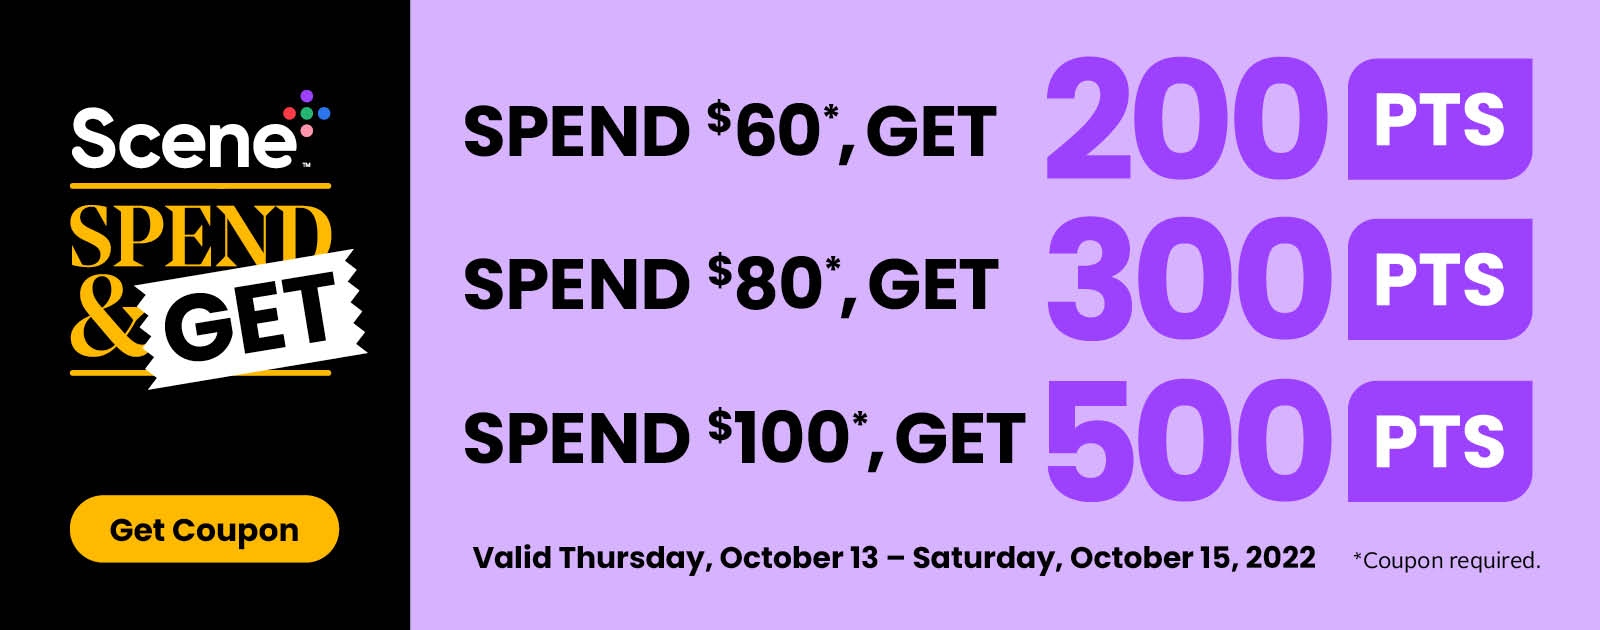 Text Reading 'Scene Plus Spend and Get! Spend $60, Get 200 points. Spend $80, Get 300 points. Spend $100, Get 500 points. Offer valid from Thursday, October 13 to Saturday, October 15, 2022. 'Get Coupon' by clicking the button below.'